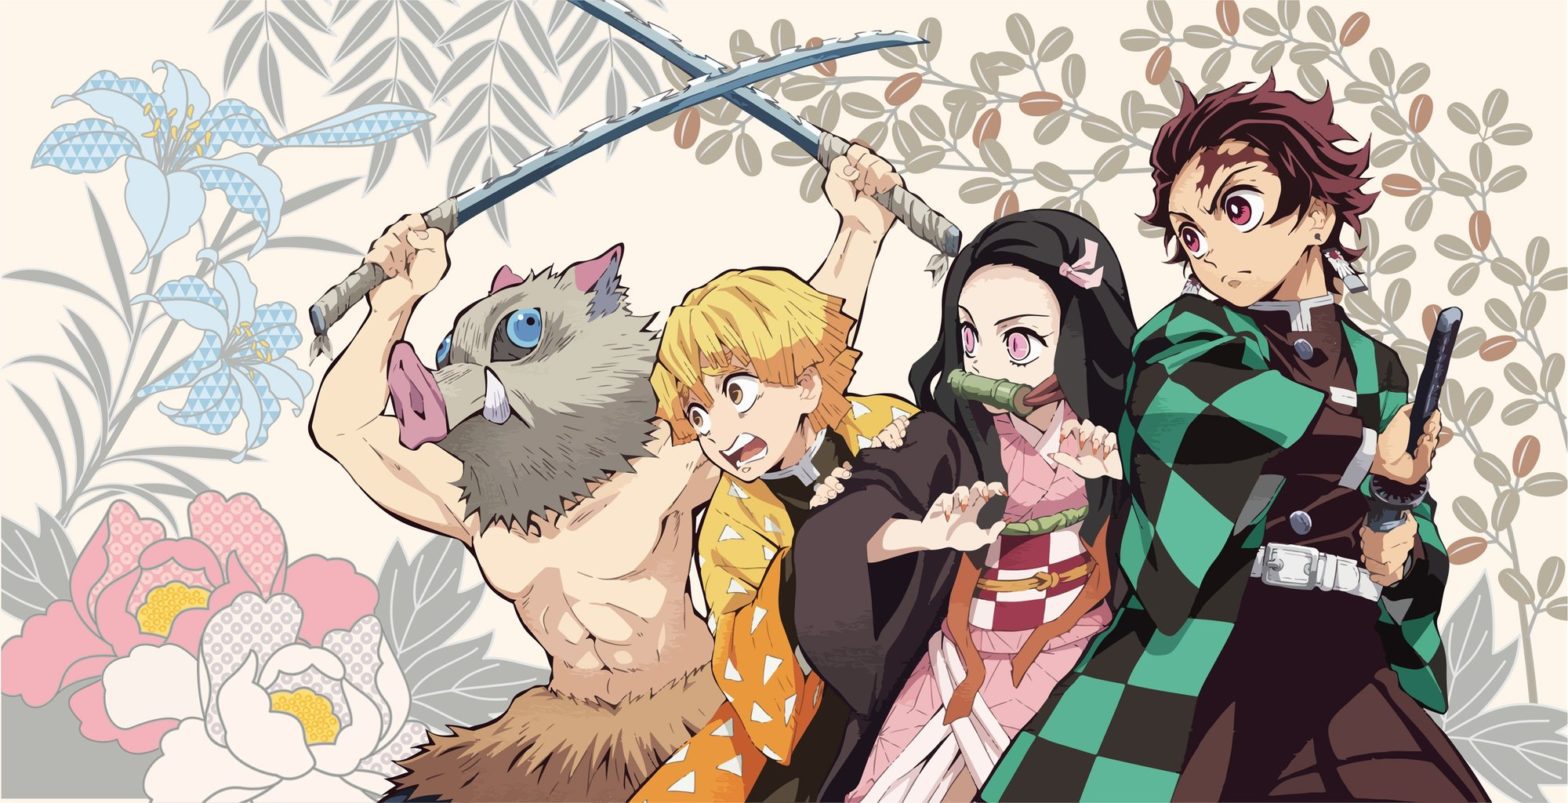 demon-slayer-kimetsu-no-yaiba characters in fighting positions beginners guide to demon slayer review by otherworlds